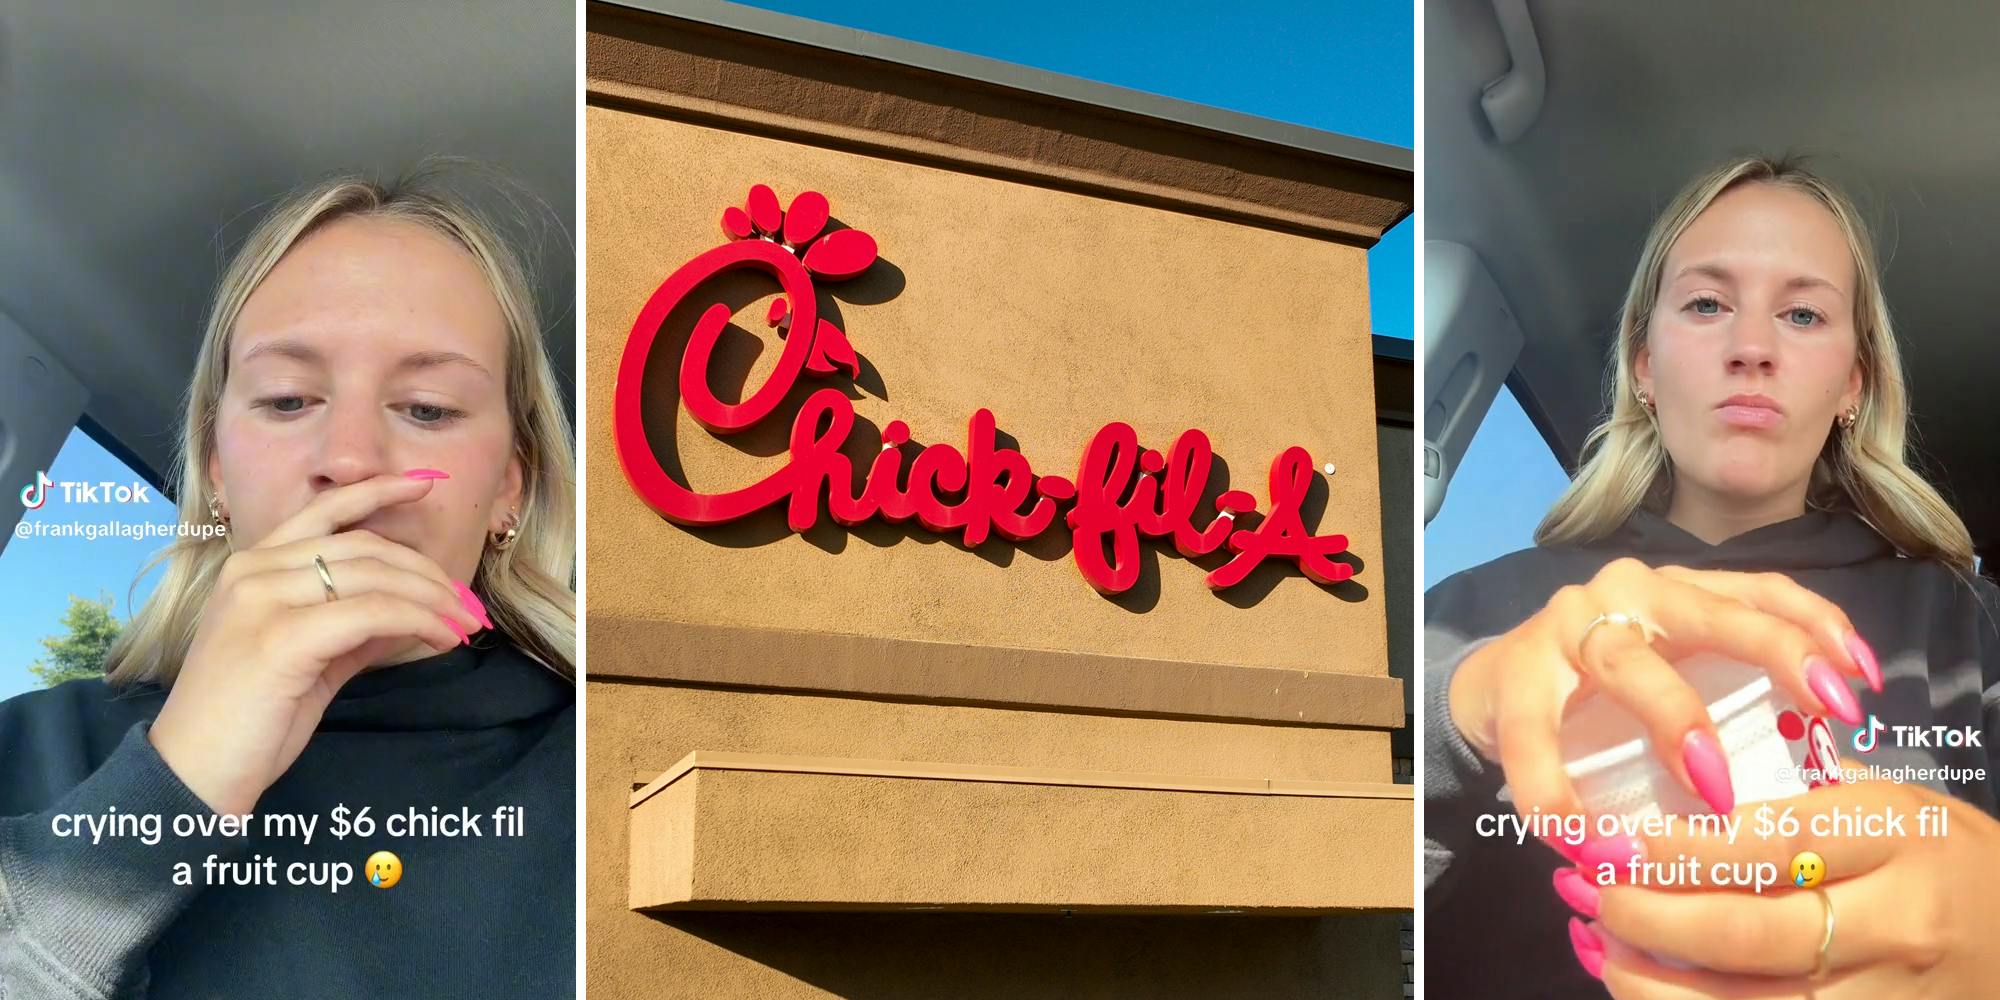 ‘They made me pay for an empty salad container today’: Customer can’t believe how much Chick-fil-A is charging for fruit cups that ‘aren’t even full’